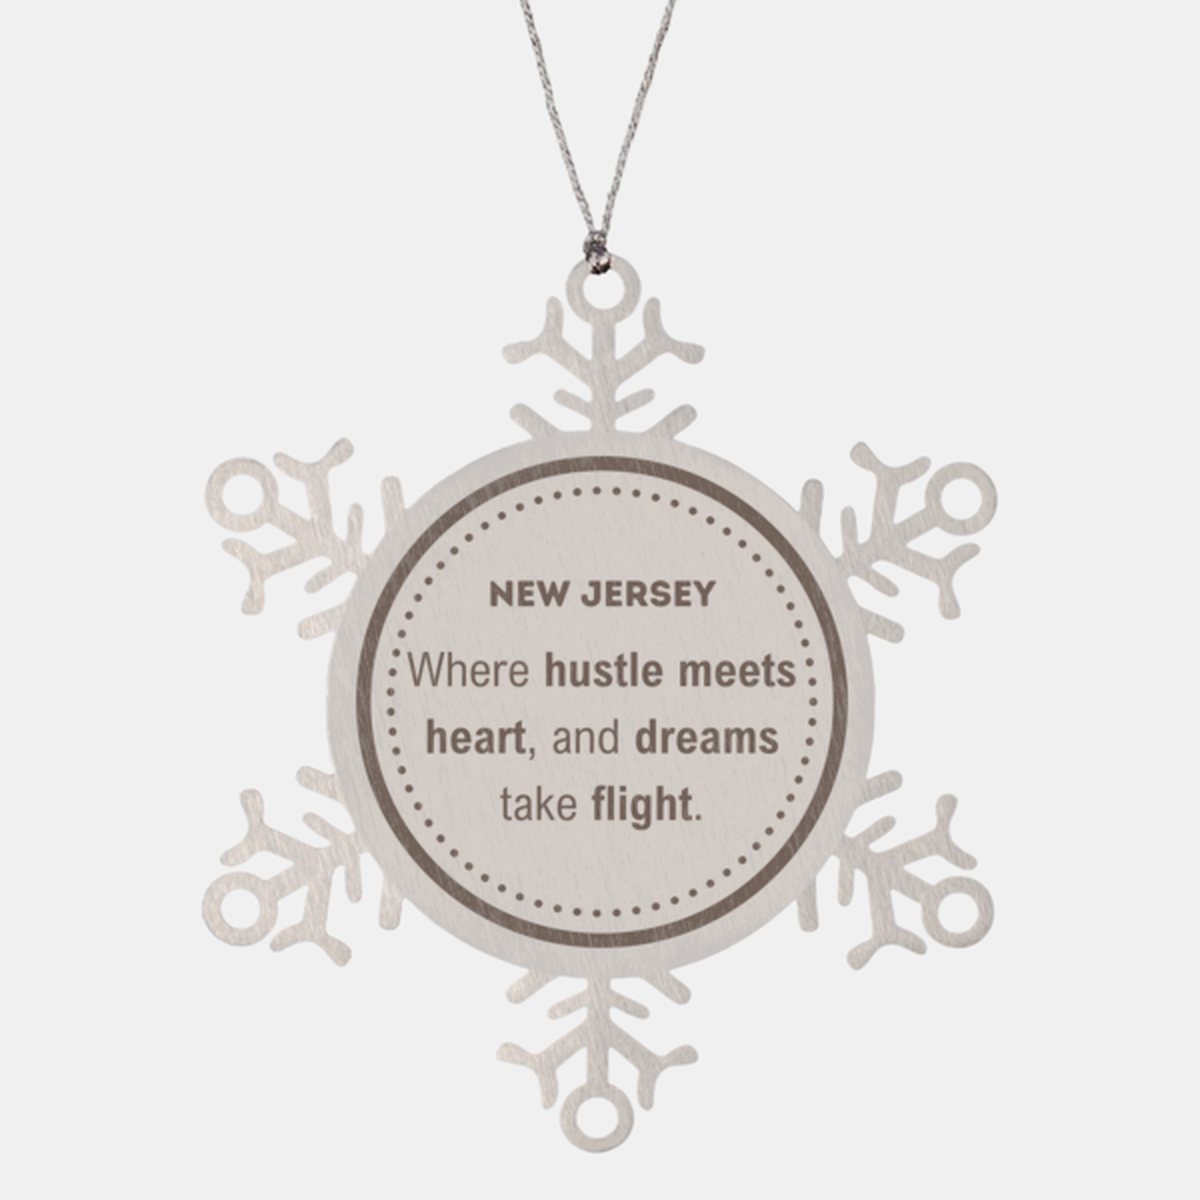 New Jersey: Where hustle meets heart, and dreams take flight, New Jersey Ornament Gifts, Proud New Jersey Christmas New Jersey Snowflake Ornament, New Jersey State People, Men, Women, Friends